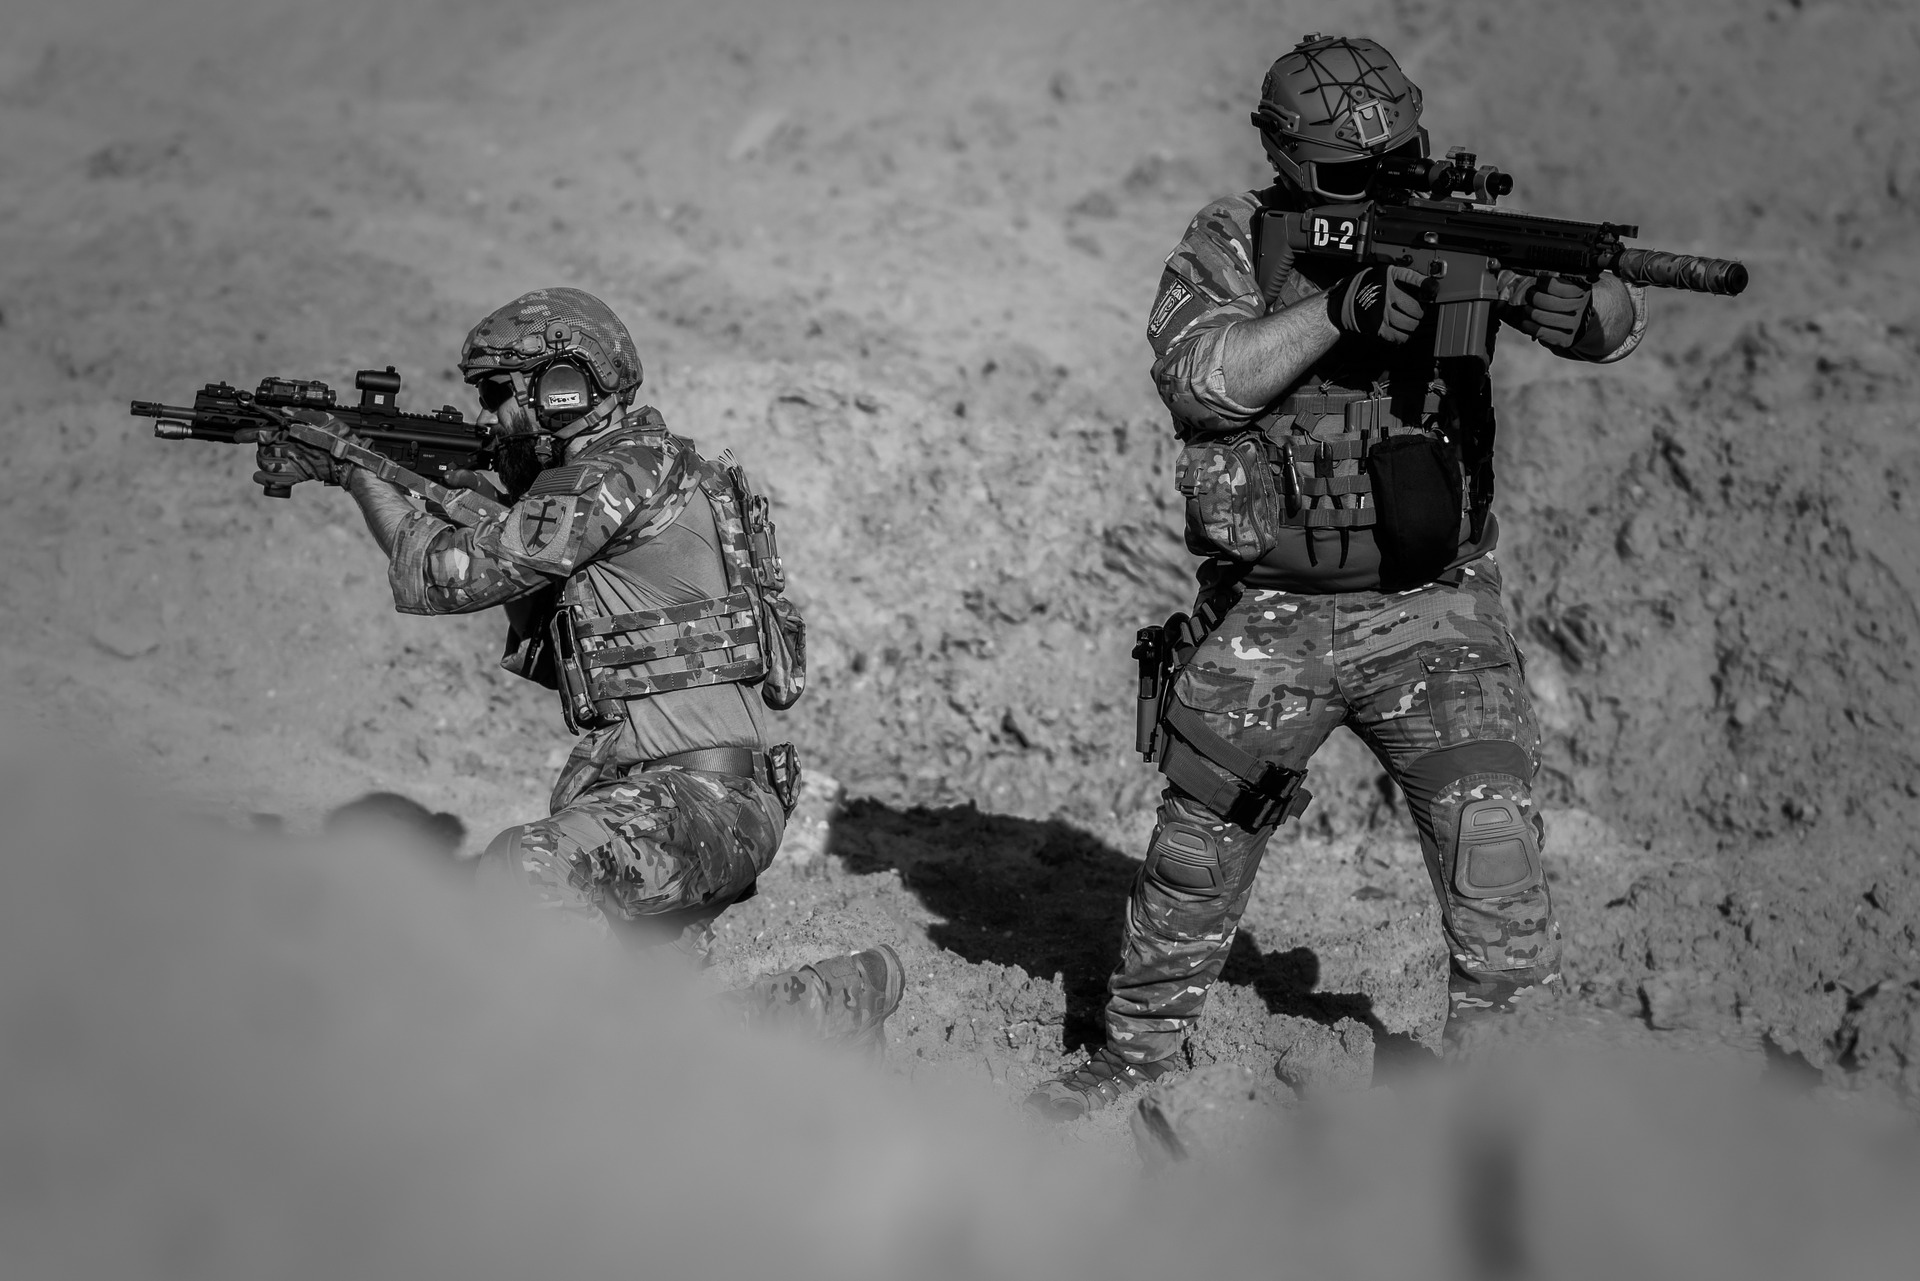 American army on a mission photo